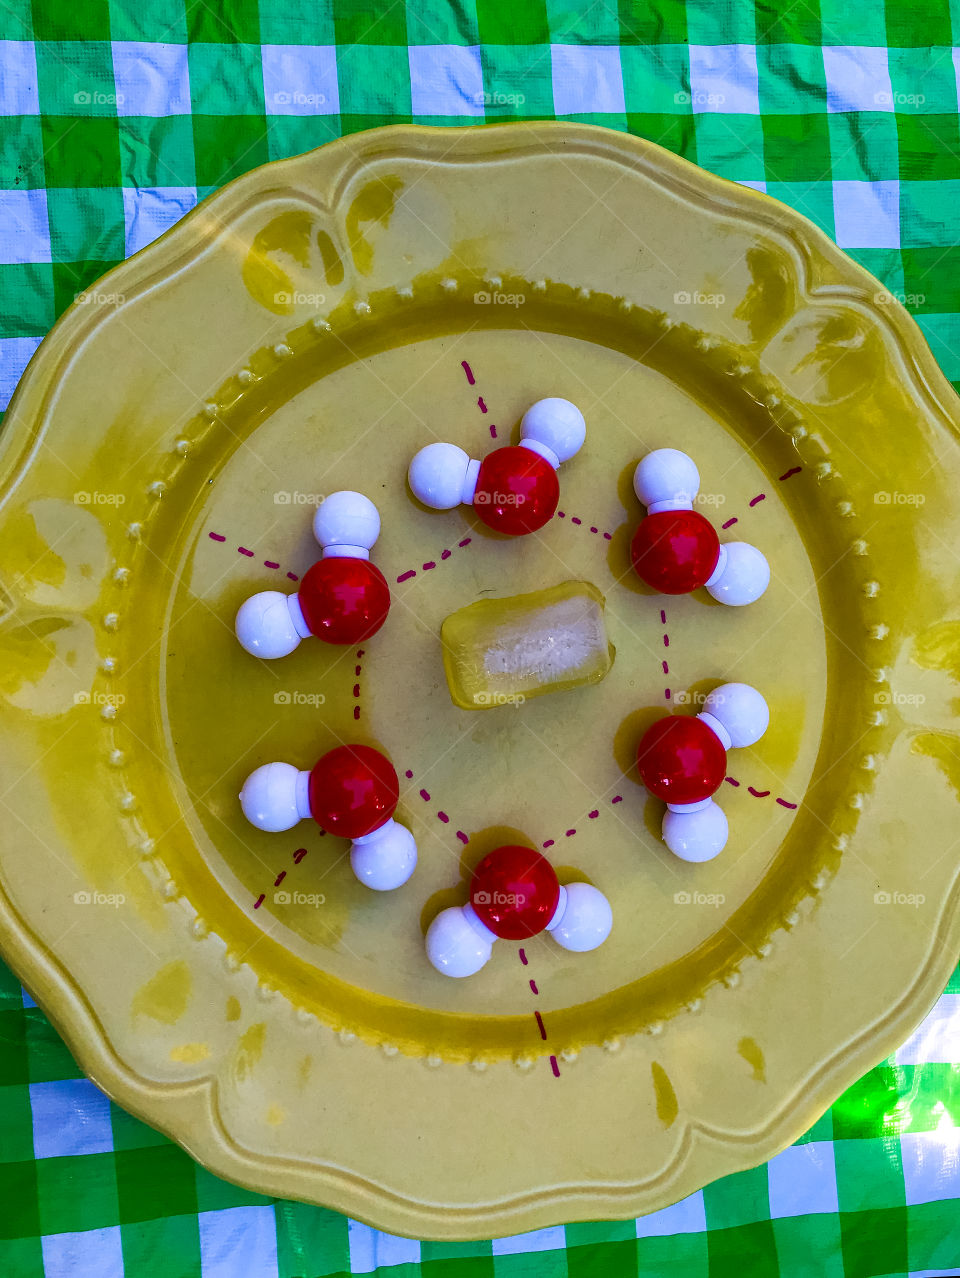 Clash of Colours: Chemistry geek alert! Red (Hydrogen) & white (Oxygen) molecule model of one ring of frozen H2O(water) surrounding an ice cube! All on a yellow plate on a green plaid tablecloth draped table. 🥶